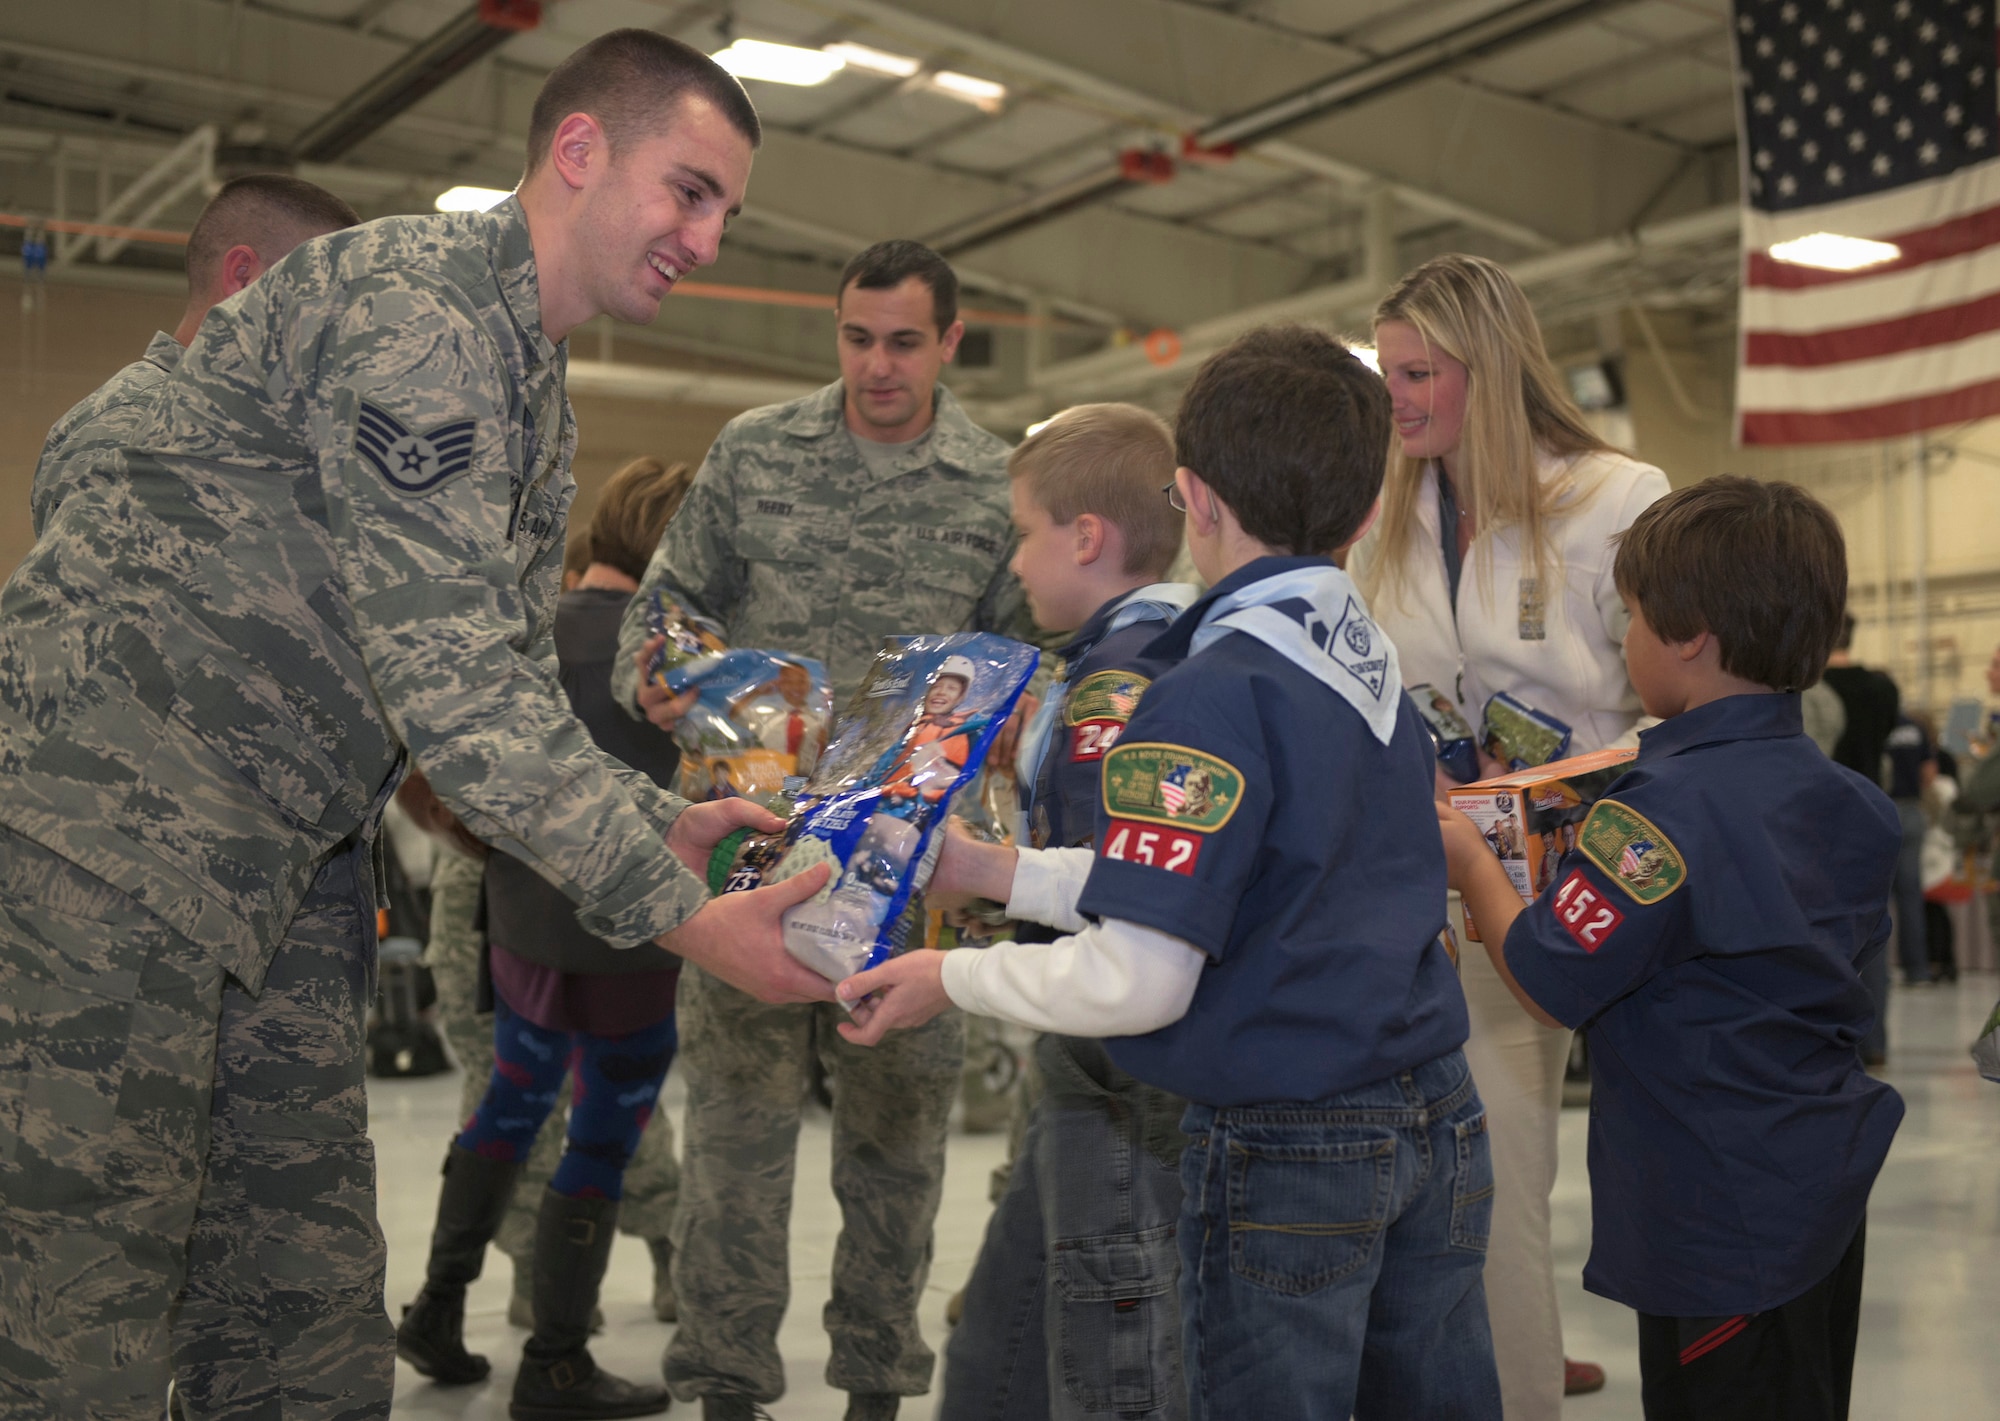 Boy Scouts from W.D. Boyce Council distribute donated popcorn to Airmen with 182nd Airlift Wing, Illinois Air National Guard, in Peoria, Ill., Dec. 3, 2016. The scouts’ donation coincided with wing’s annual holiday party. (U.S. Air National Guard photo by Tech. Sgt. Lealan Buehrer)